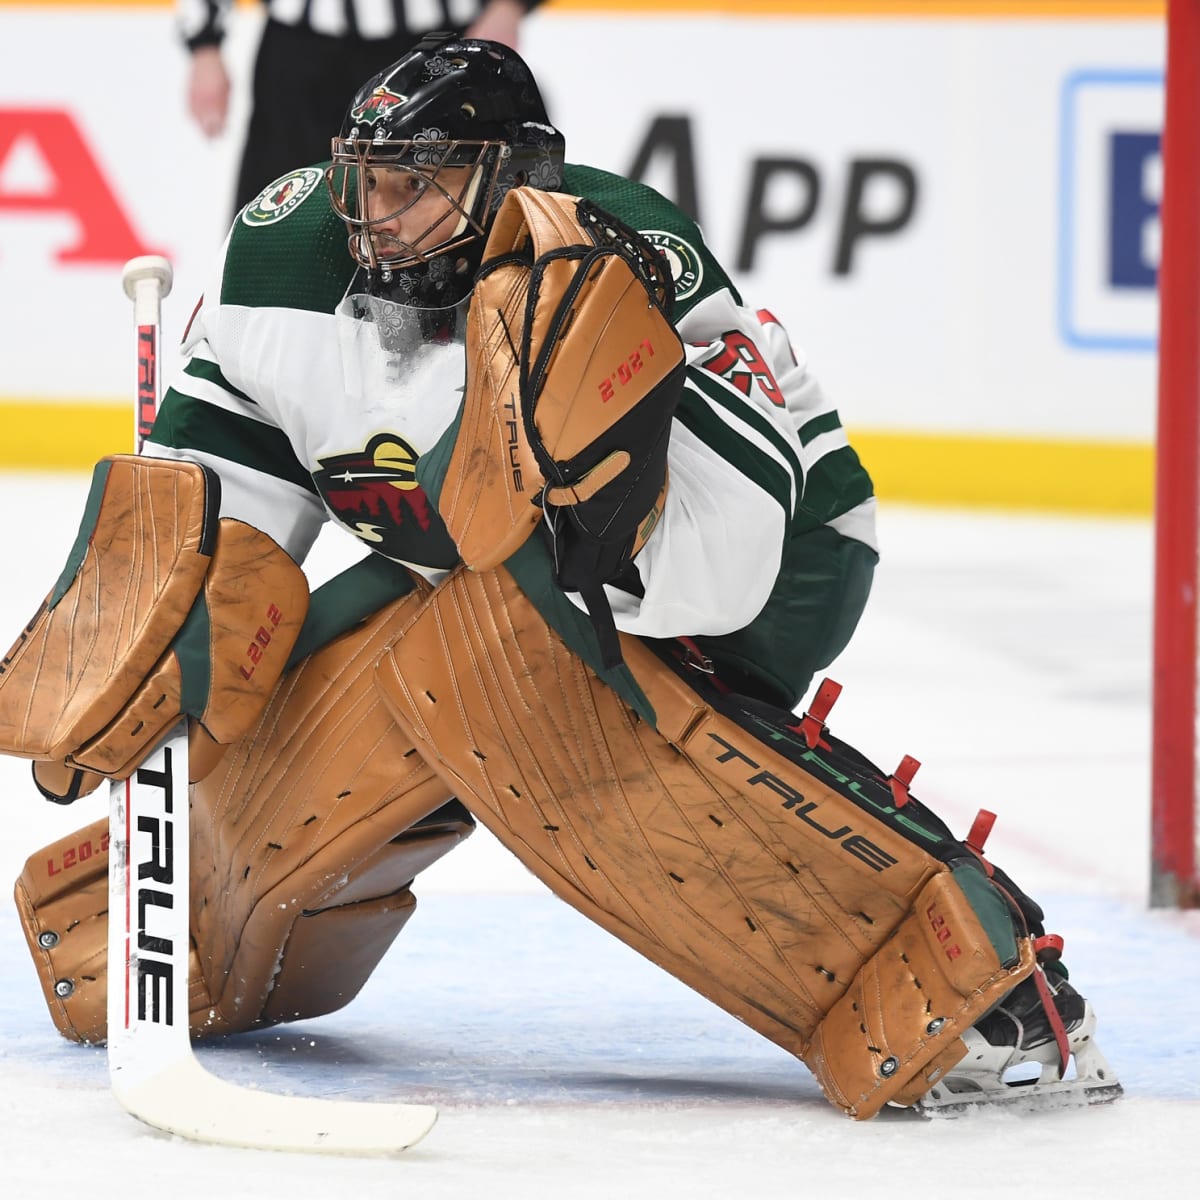 NHL: Marc-Andre Fleury returning to Wild on 2-year deal